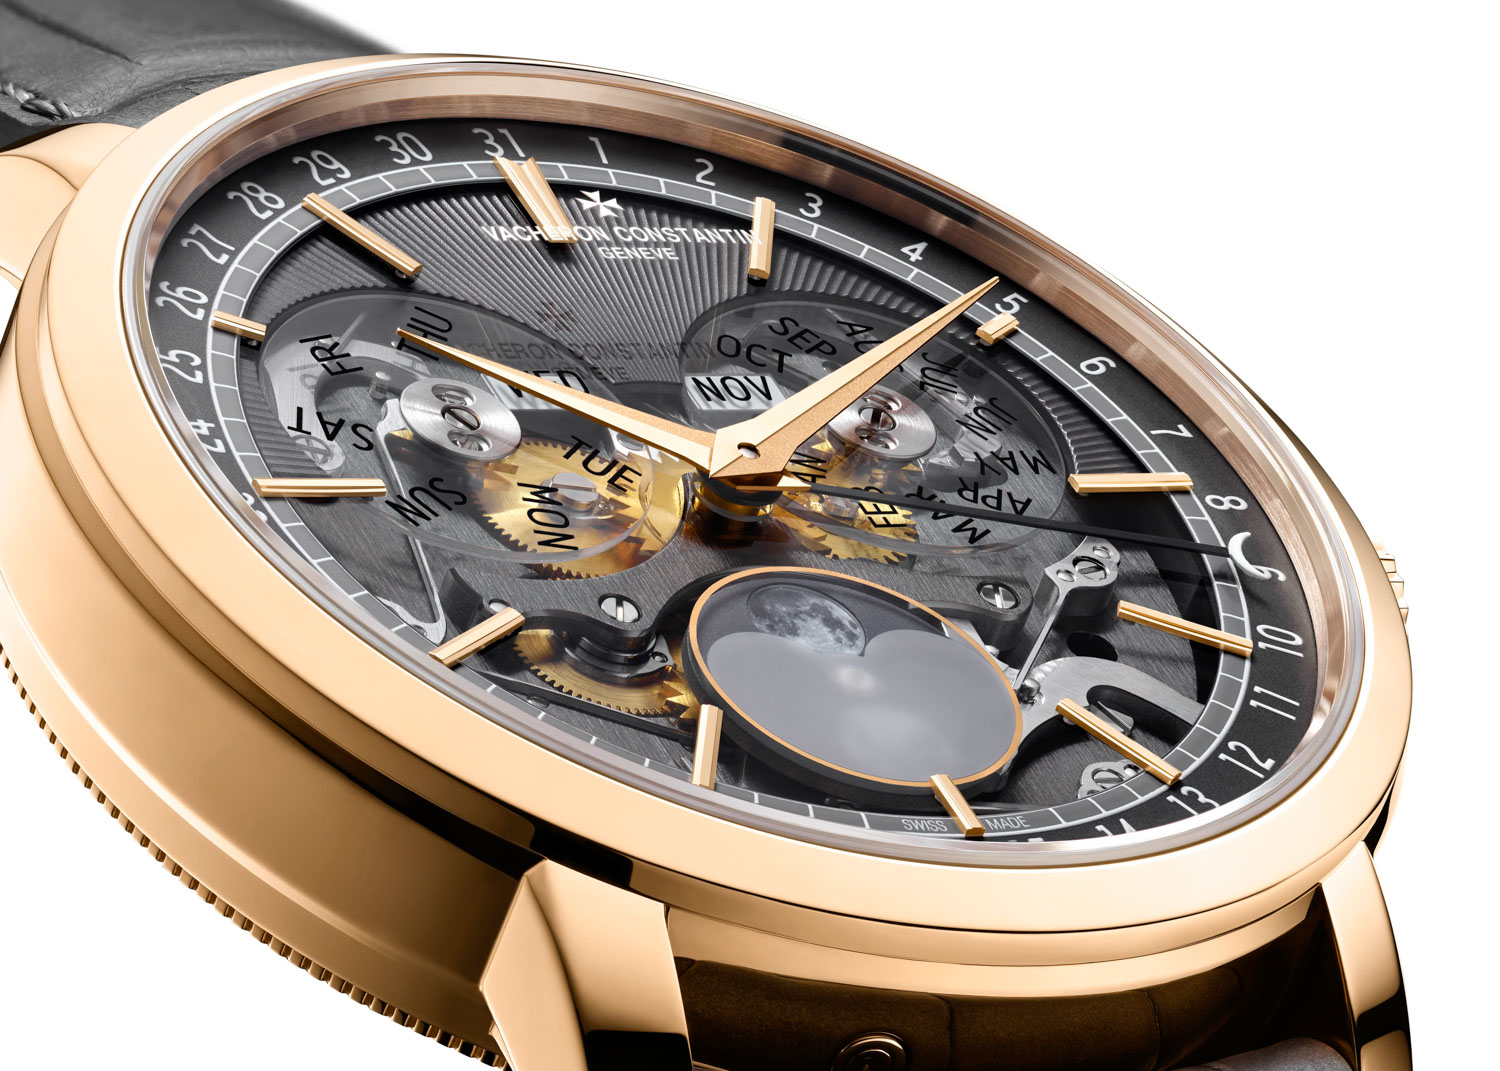 The Vacheron Constantin Traditionnelle Complete Calendar Openface in 18K 5N pink gold